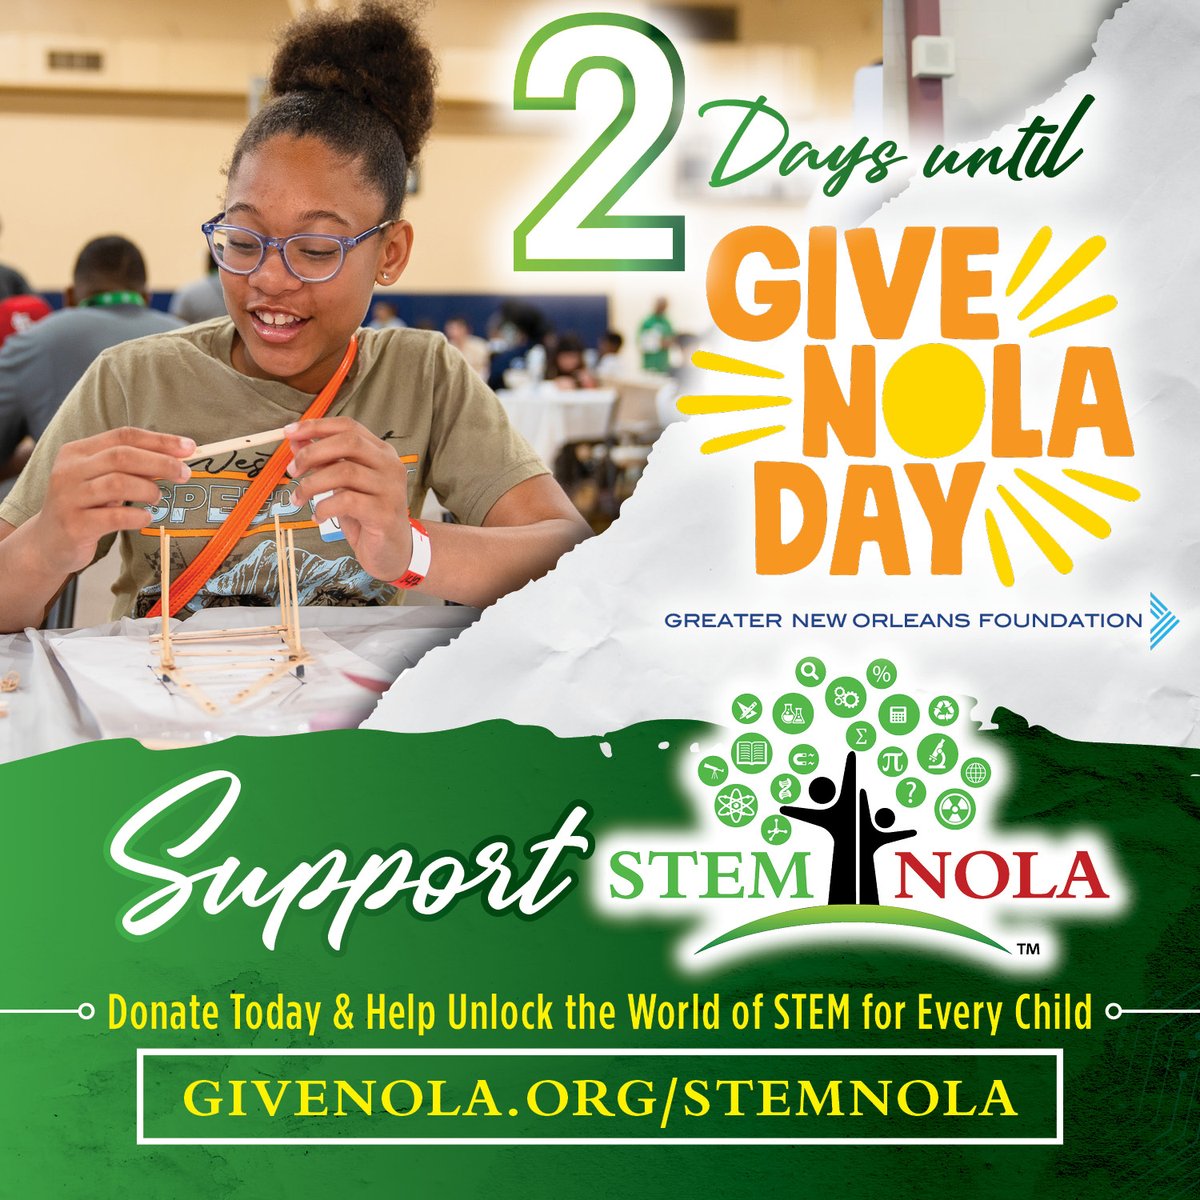 Just 2️⃣ days until Give NOLA Day! Make a gift to STEM NOLA to help fuel curiosity and discovery in our community. Every contribution goes directly towards inspiring young minds in STEM! Head to givenola.org/stemnola to make a gift today! #STEMforALL #YOUbelonginSTEM #GiveNOLA